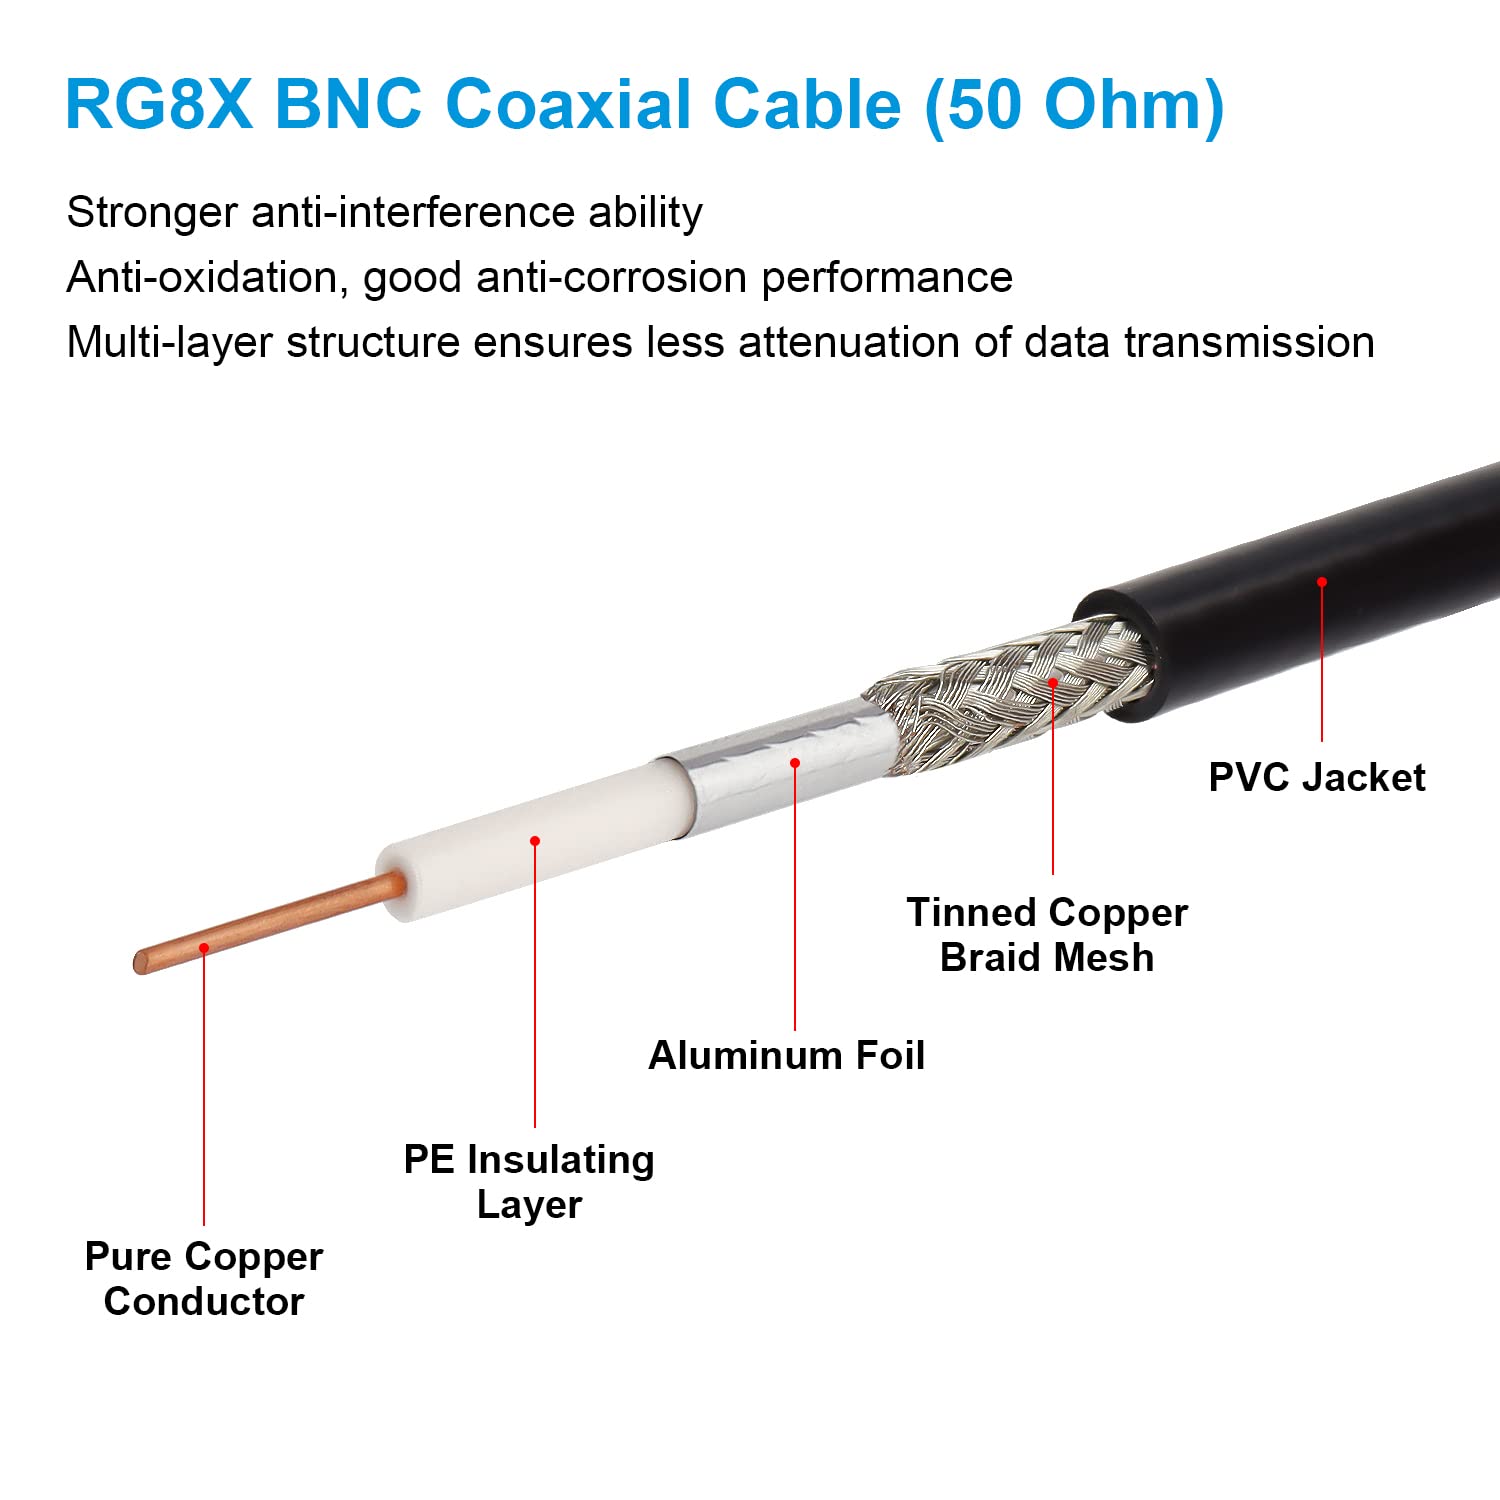 Great Choice Products Bnc Male To Bnc Female Coaxial Cable 50 Ohm Rg8X Coax Cable Ultra Low Loss Bnc Jumper Cable For Antenna, Rf Radio, Modem…